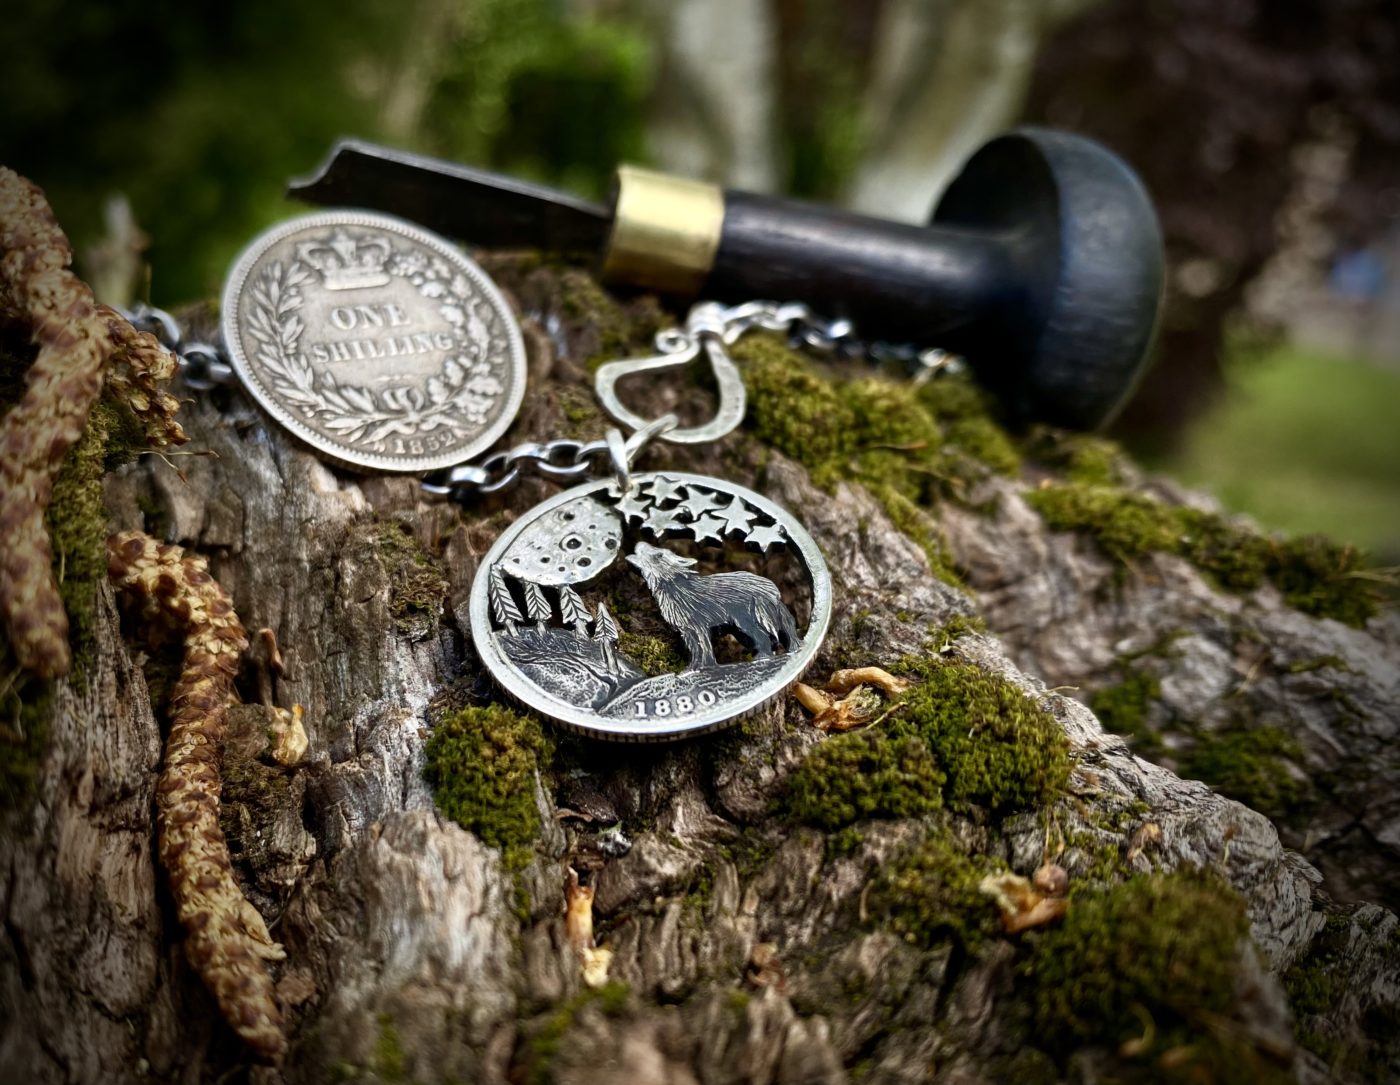 Handcrafted and recycled silver shilling The Silver Shilling collection. silver wolves necklace totally handcrafted and recycled from old sterling silver shilling coins. Designed and created by Hairy Growler Jewellery, Cambridge, UK. necklace